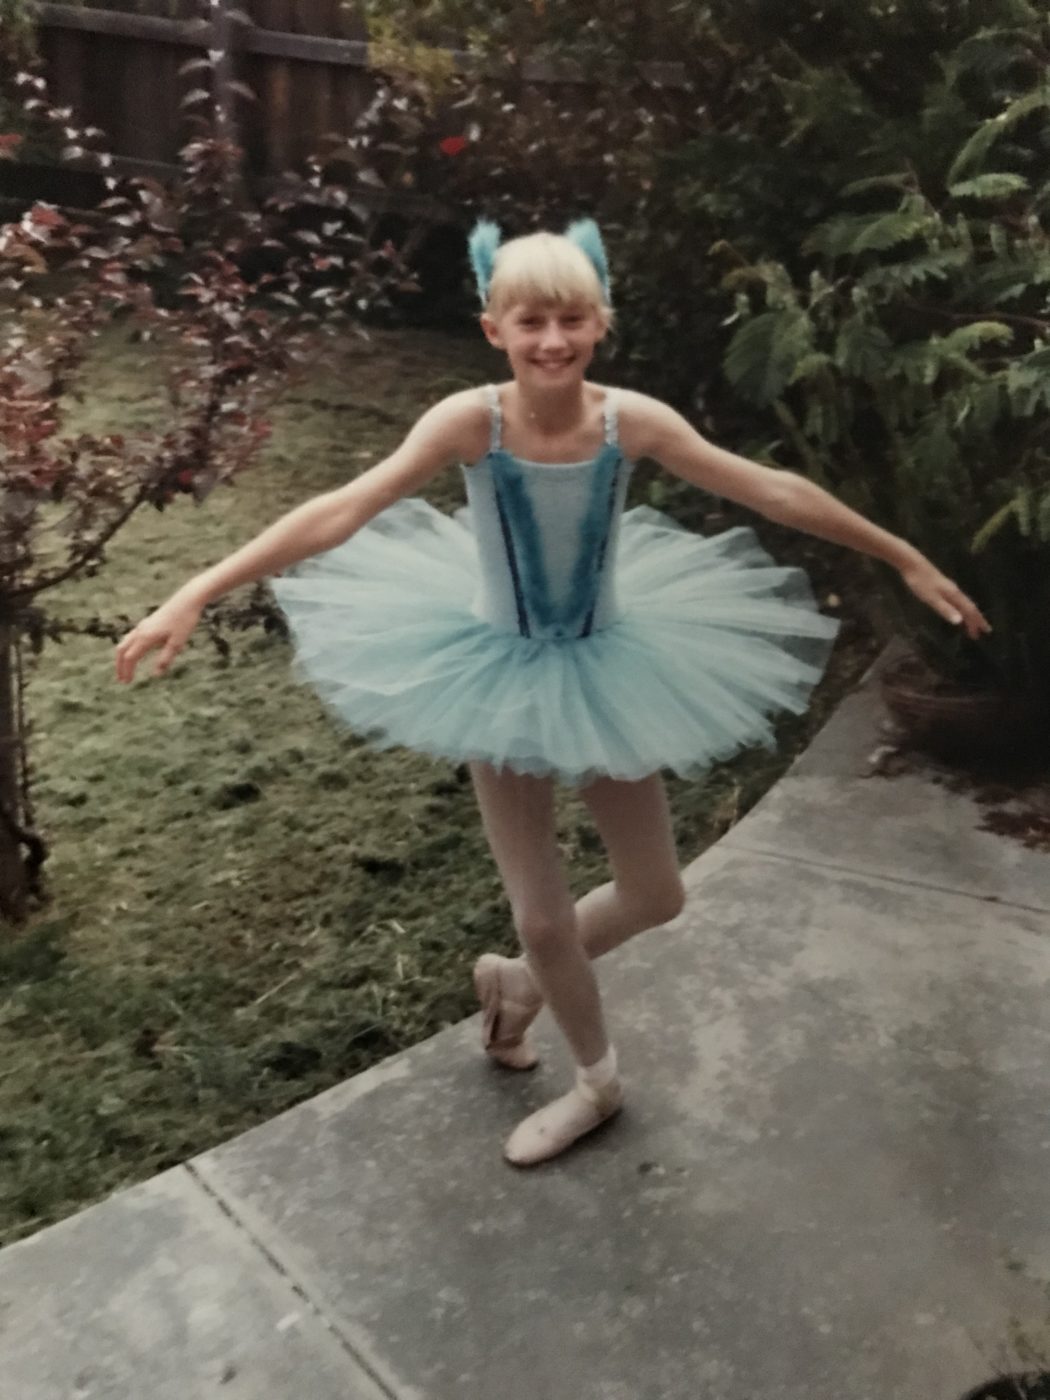 Image a young girl dressed in a blue ballerina outfit